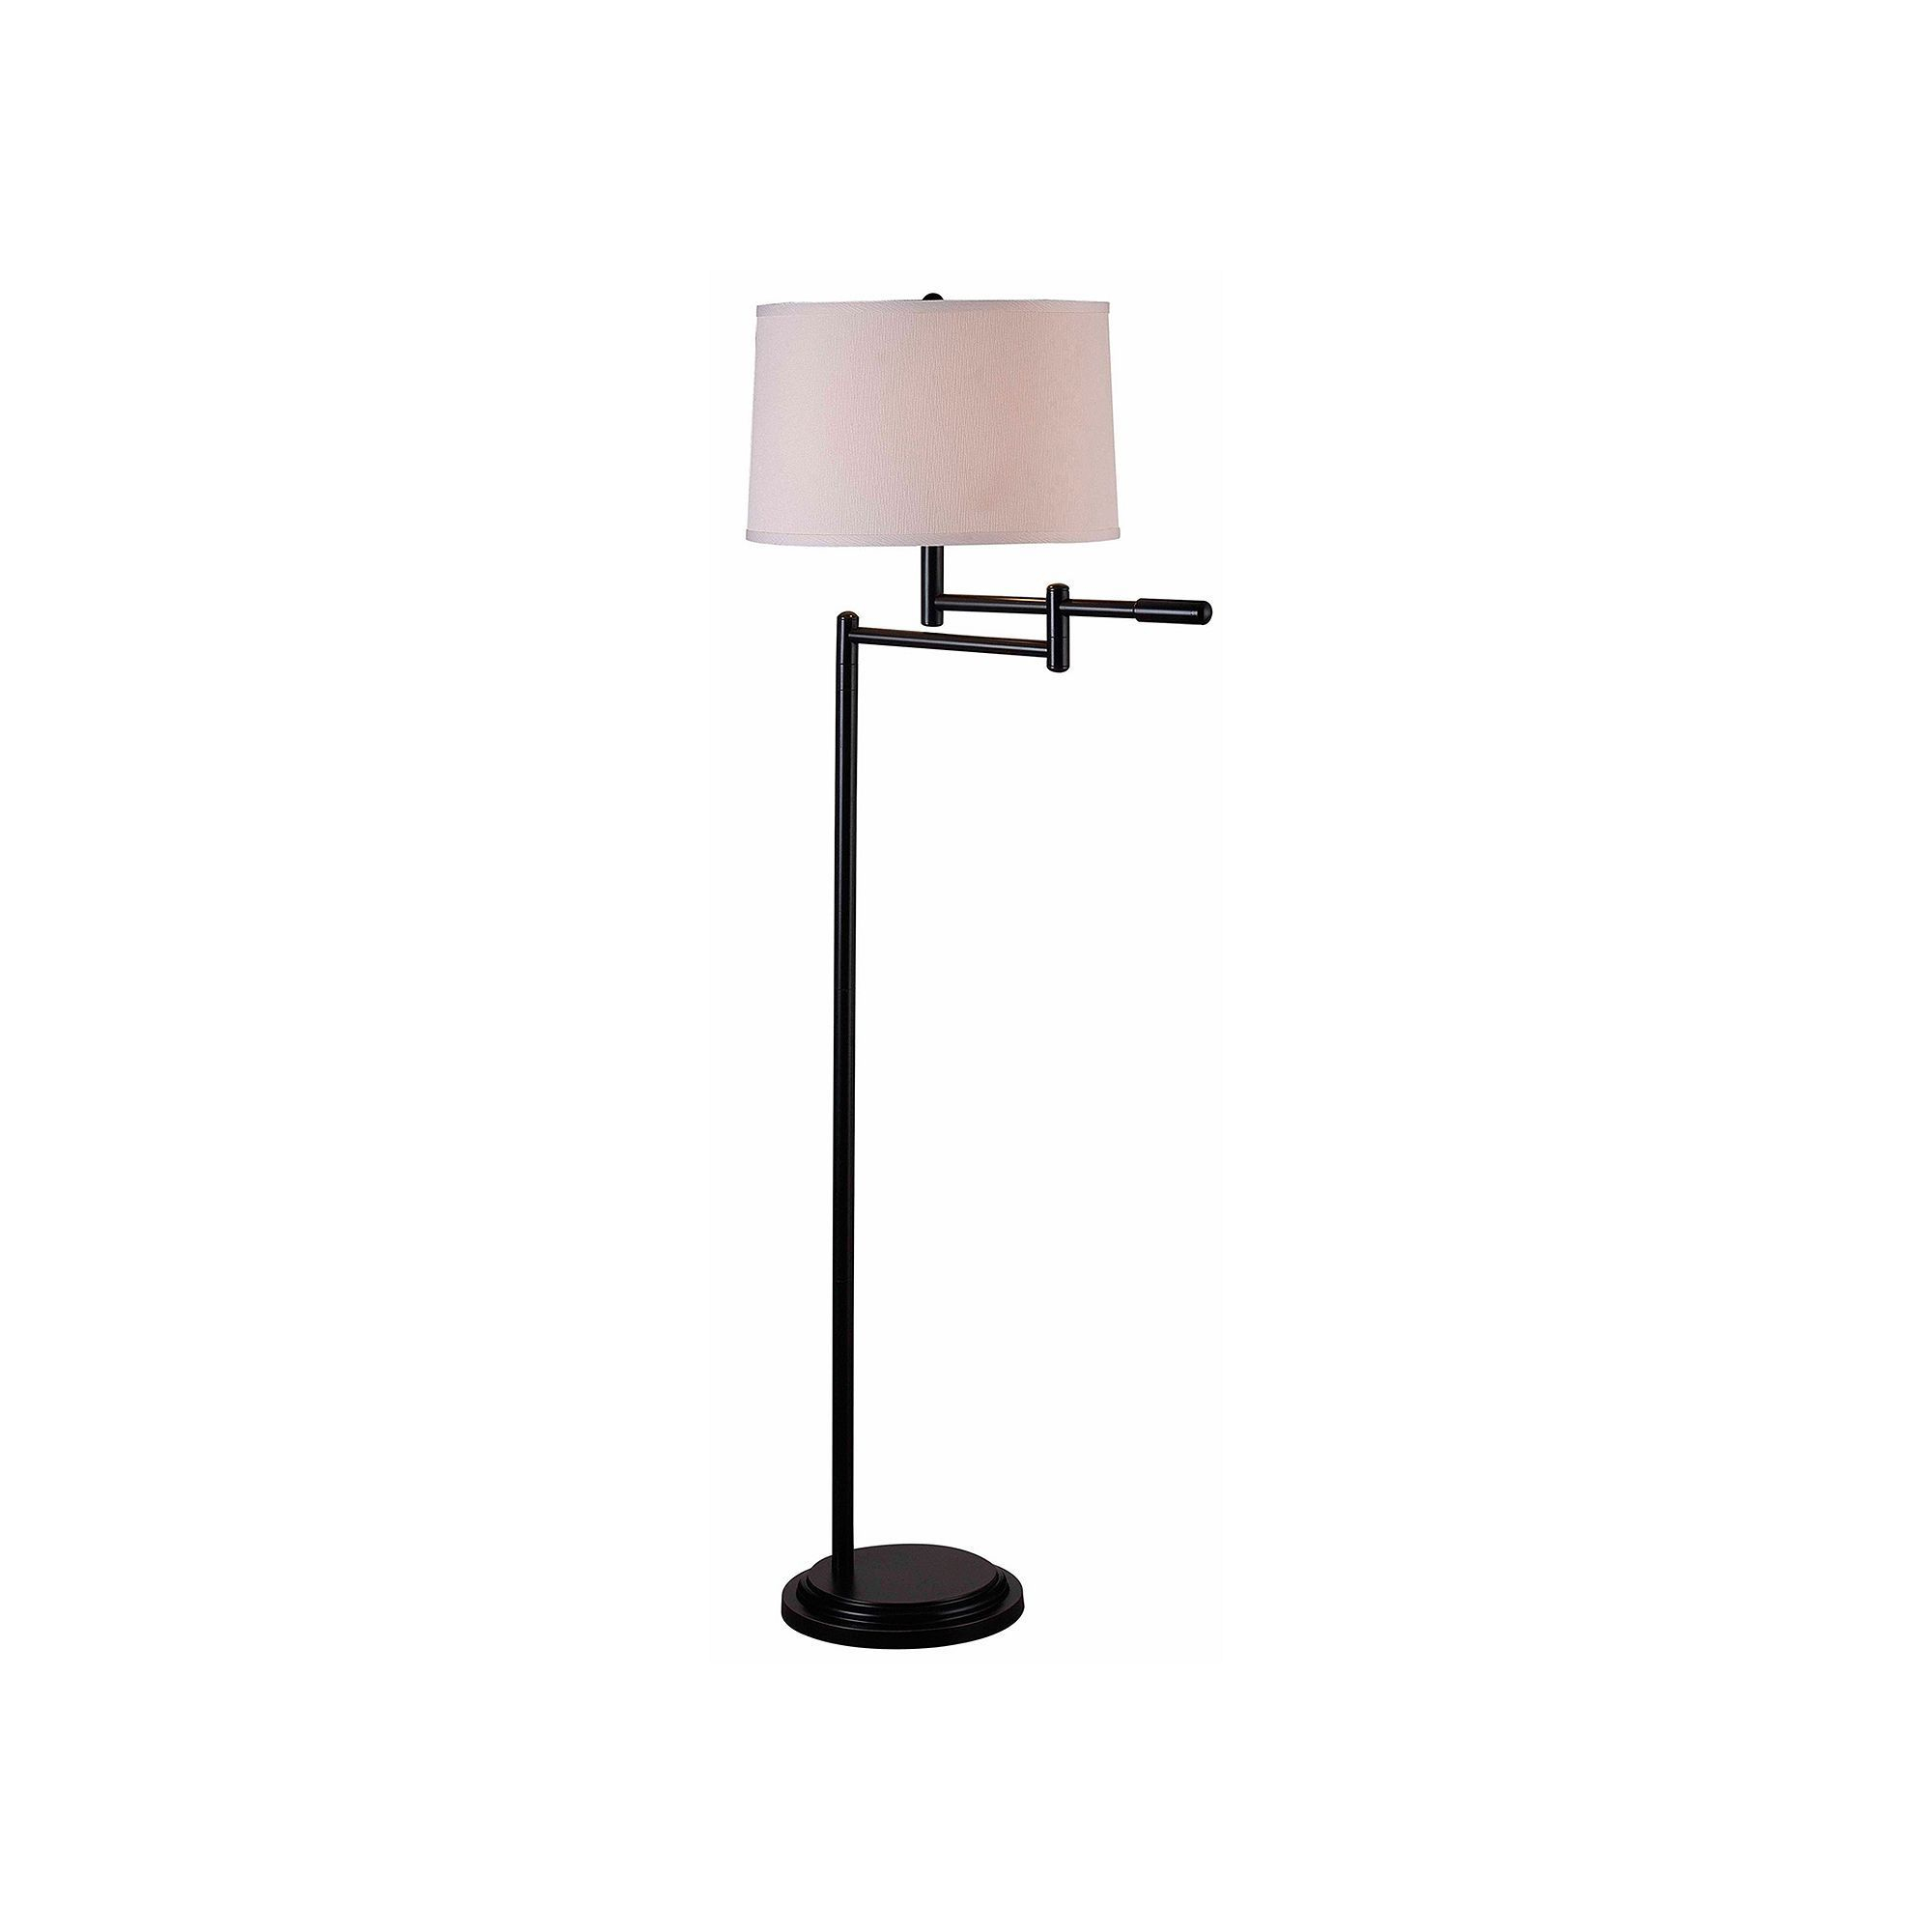 Kenroy Home Theta Swing Arm Floor Lamp Products Copper intended for dimensions 2000 X 2000